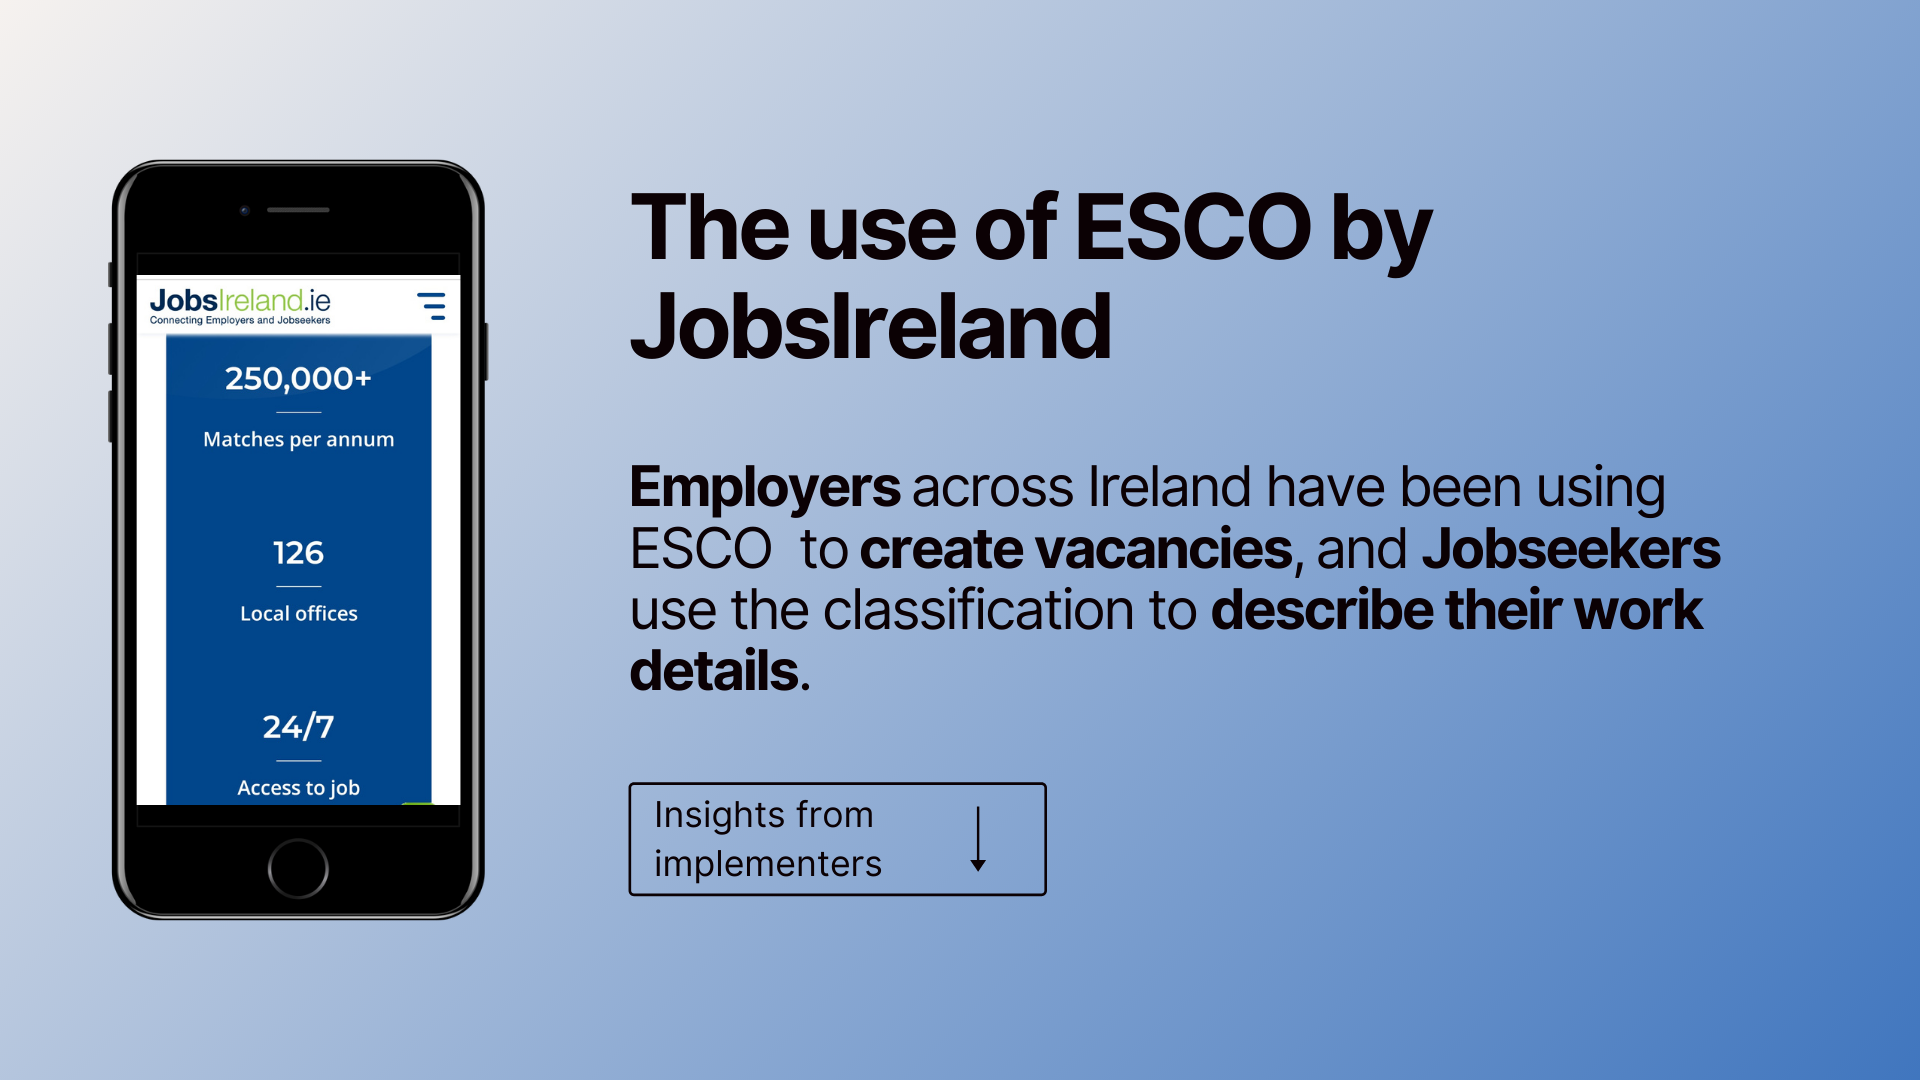 Image: ESCO Usage by JobsIreland with Front Page Screenshot